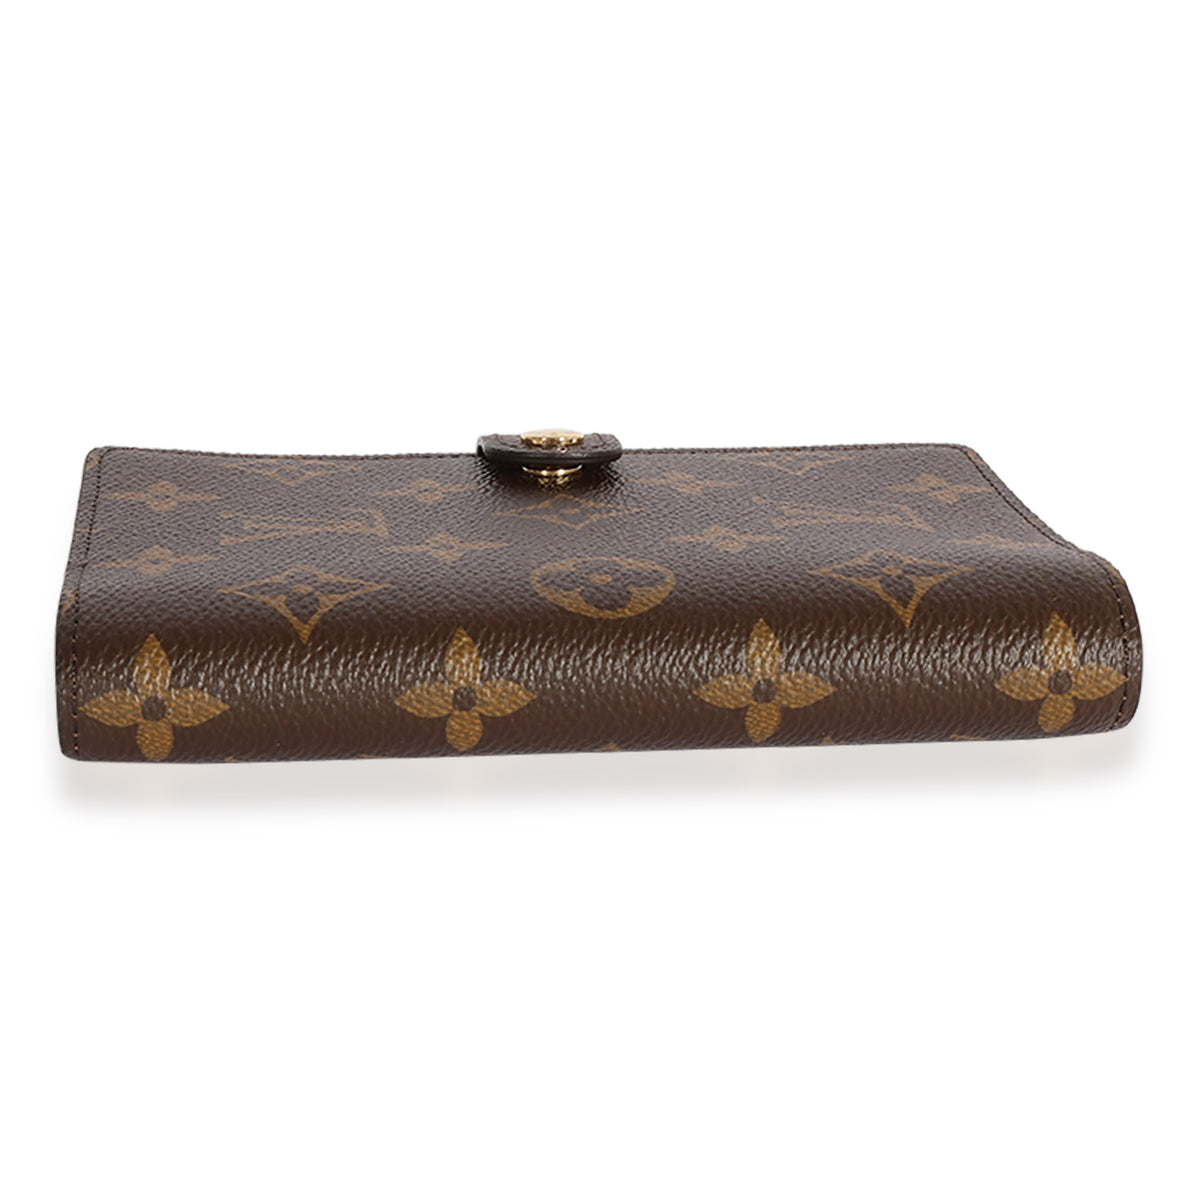 Shop Louis Vuitton MONOGRAM Small Ring Agenda Cover (R20005) by